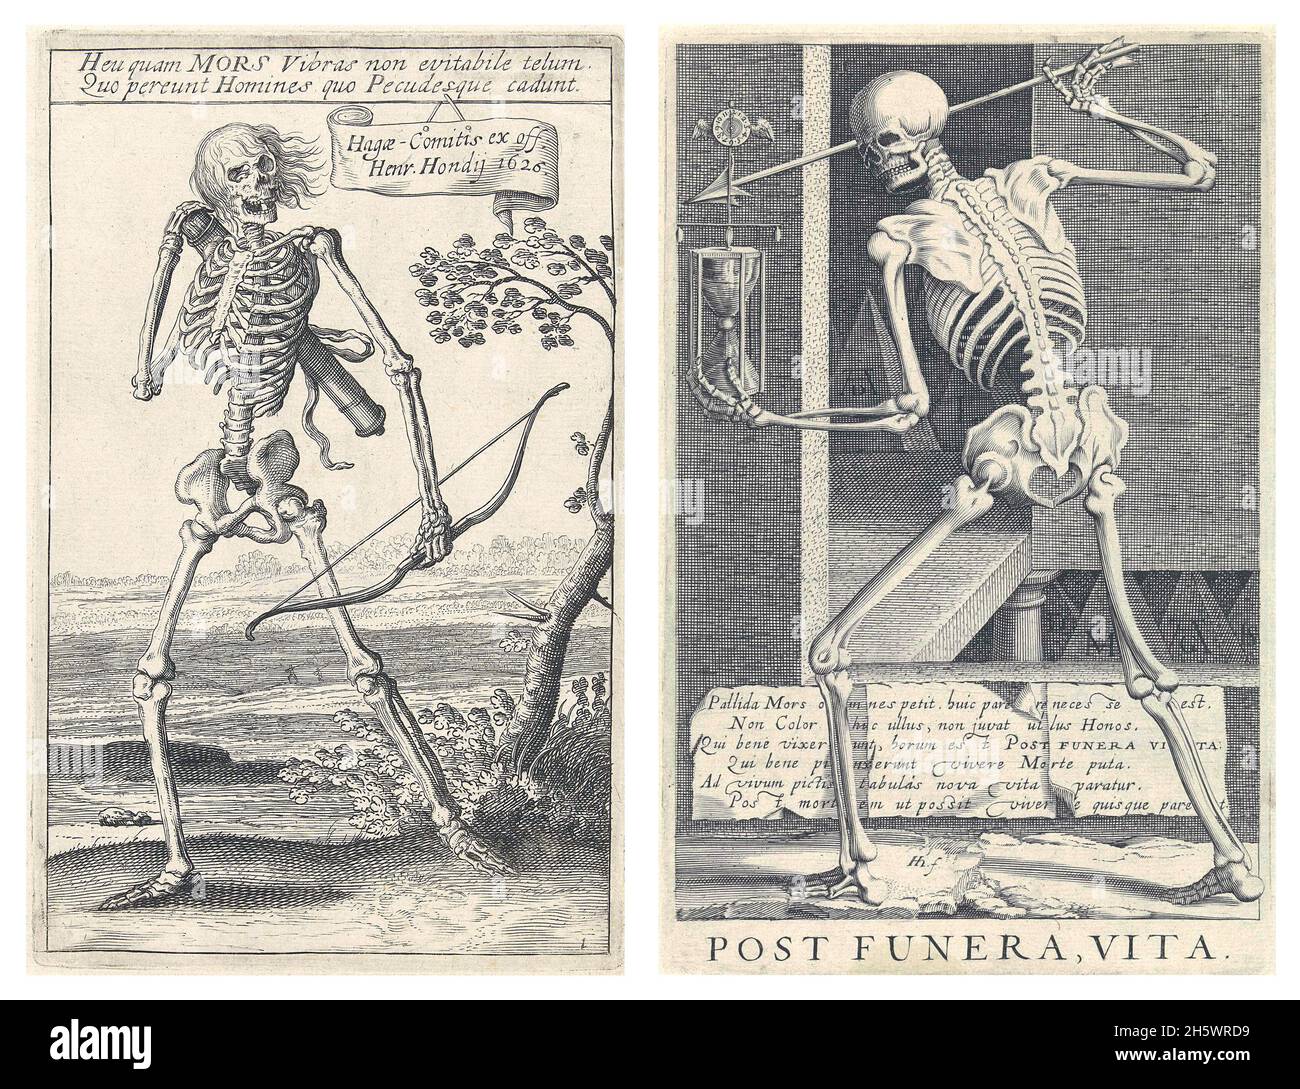 Historical illustrations of skeletons. Left: Death in the form of a skeleton with quiver on back and bow in hand by printmakers Hendrick Hondius I, Andries Jacobsz. Stock & Simon Frisius. Right: Allegory of celebrity after death. Death as a skeleton with an hourglass and an arrow. In the background, monograms of famous, deceased artists. Behind Death six lines in Latin. From the series Pictorum Aliquot Celebrium Praecipuae Germaniae Inferioris Effigies by Hendrick Hondius I, Simon Frisius, Andries Jacobsz. Stock & Robert de Baudous.  A digitally optimised composite of 2 historical images. Stock Photo